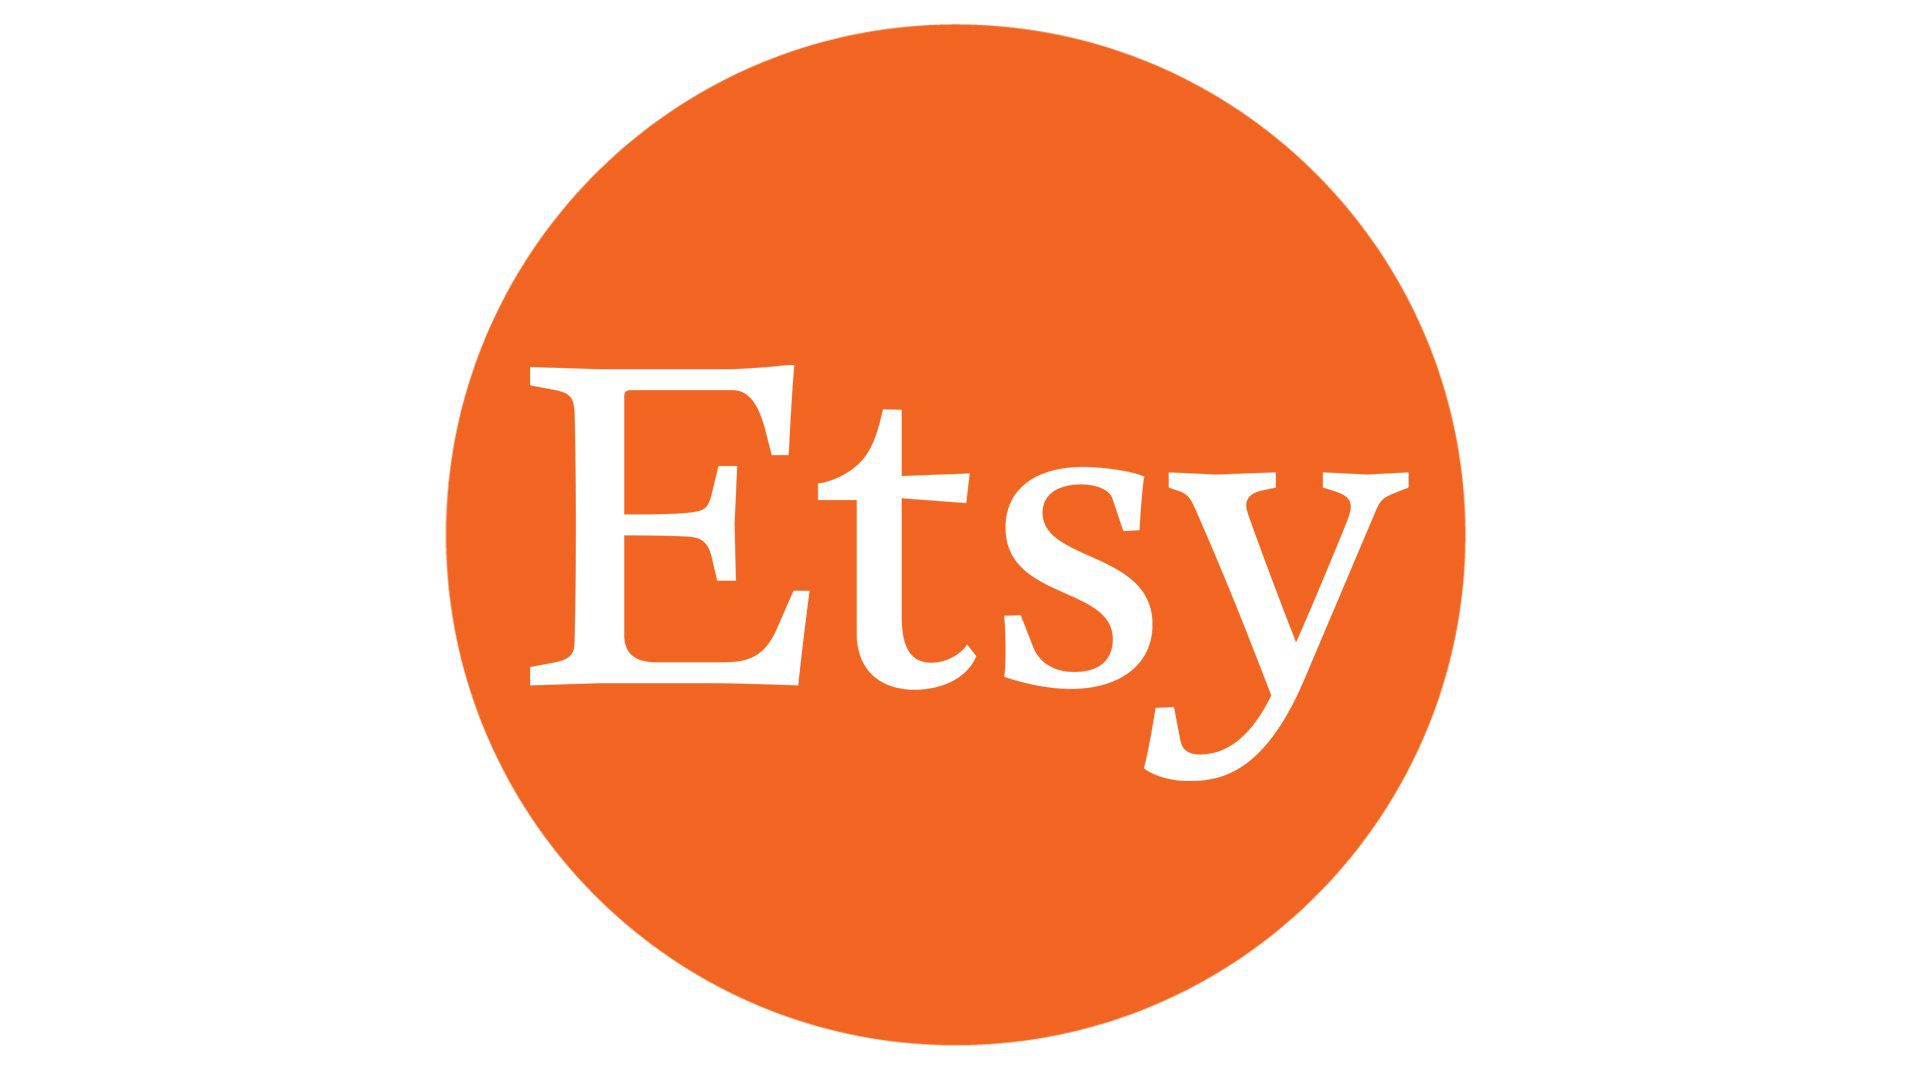 How to get sales on etsy for beginners